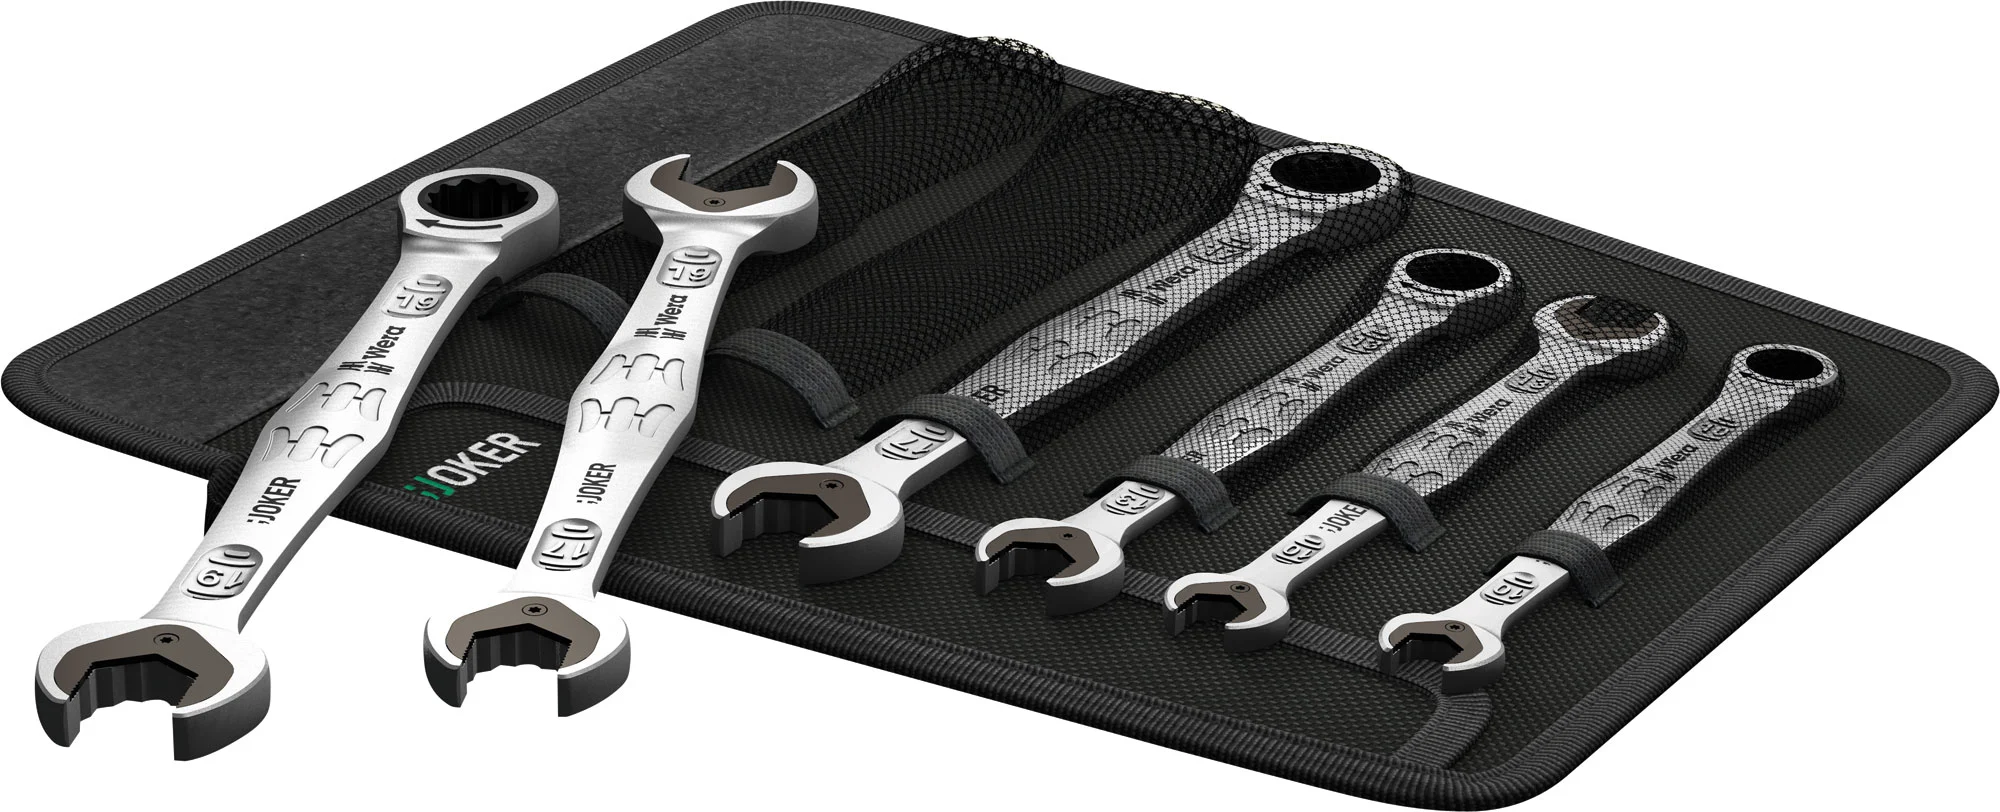 Wera Tools Sale! Joker Spanner Wrench Set New Style Set Of 4